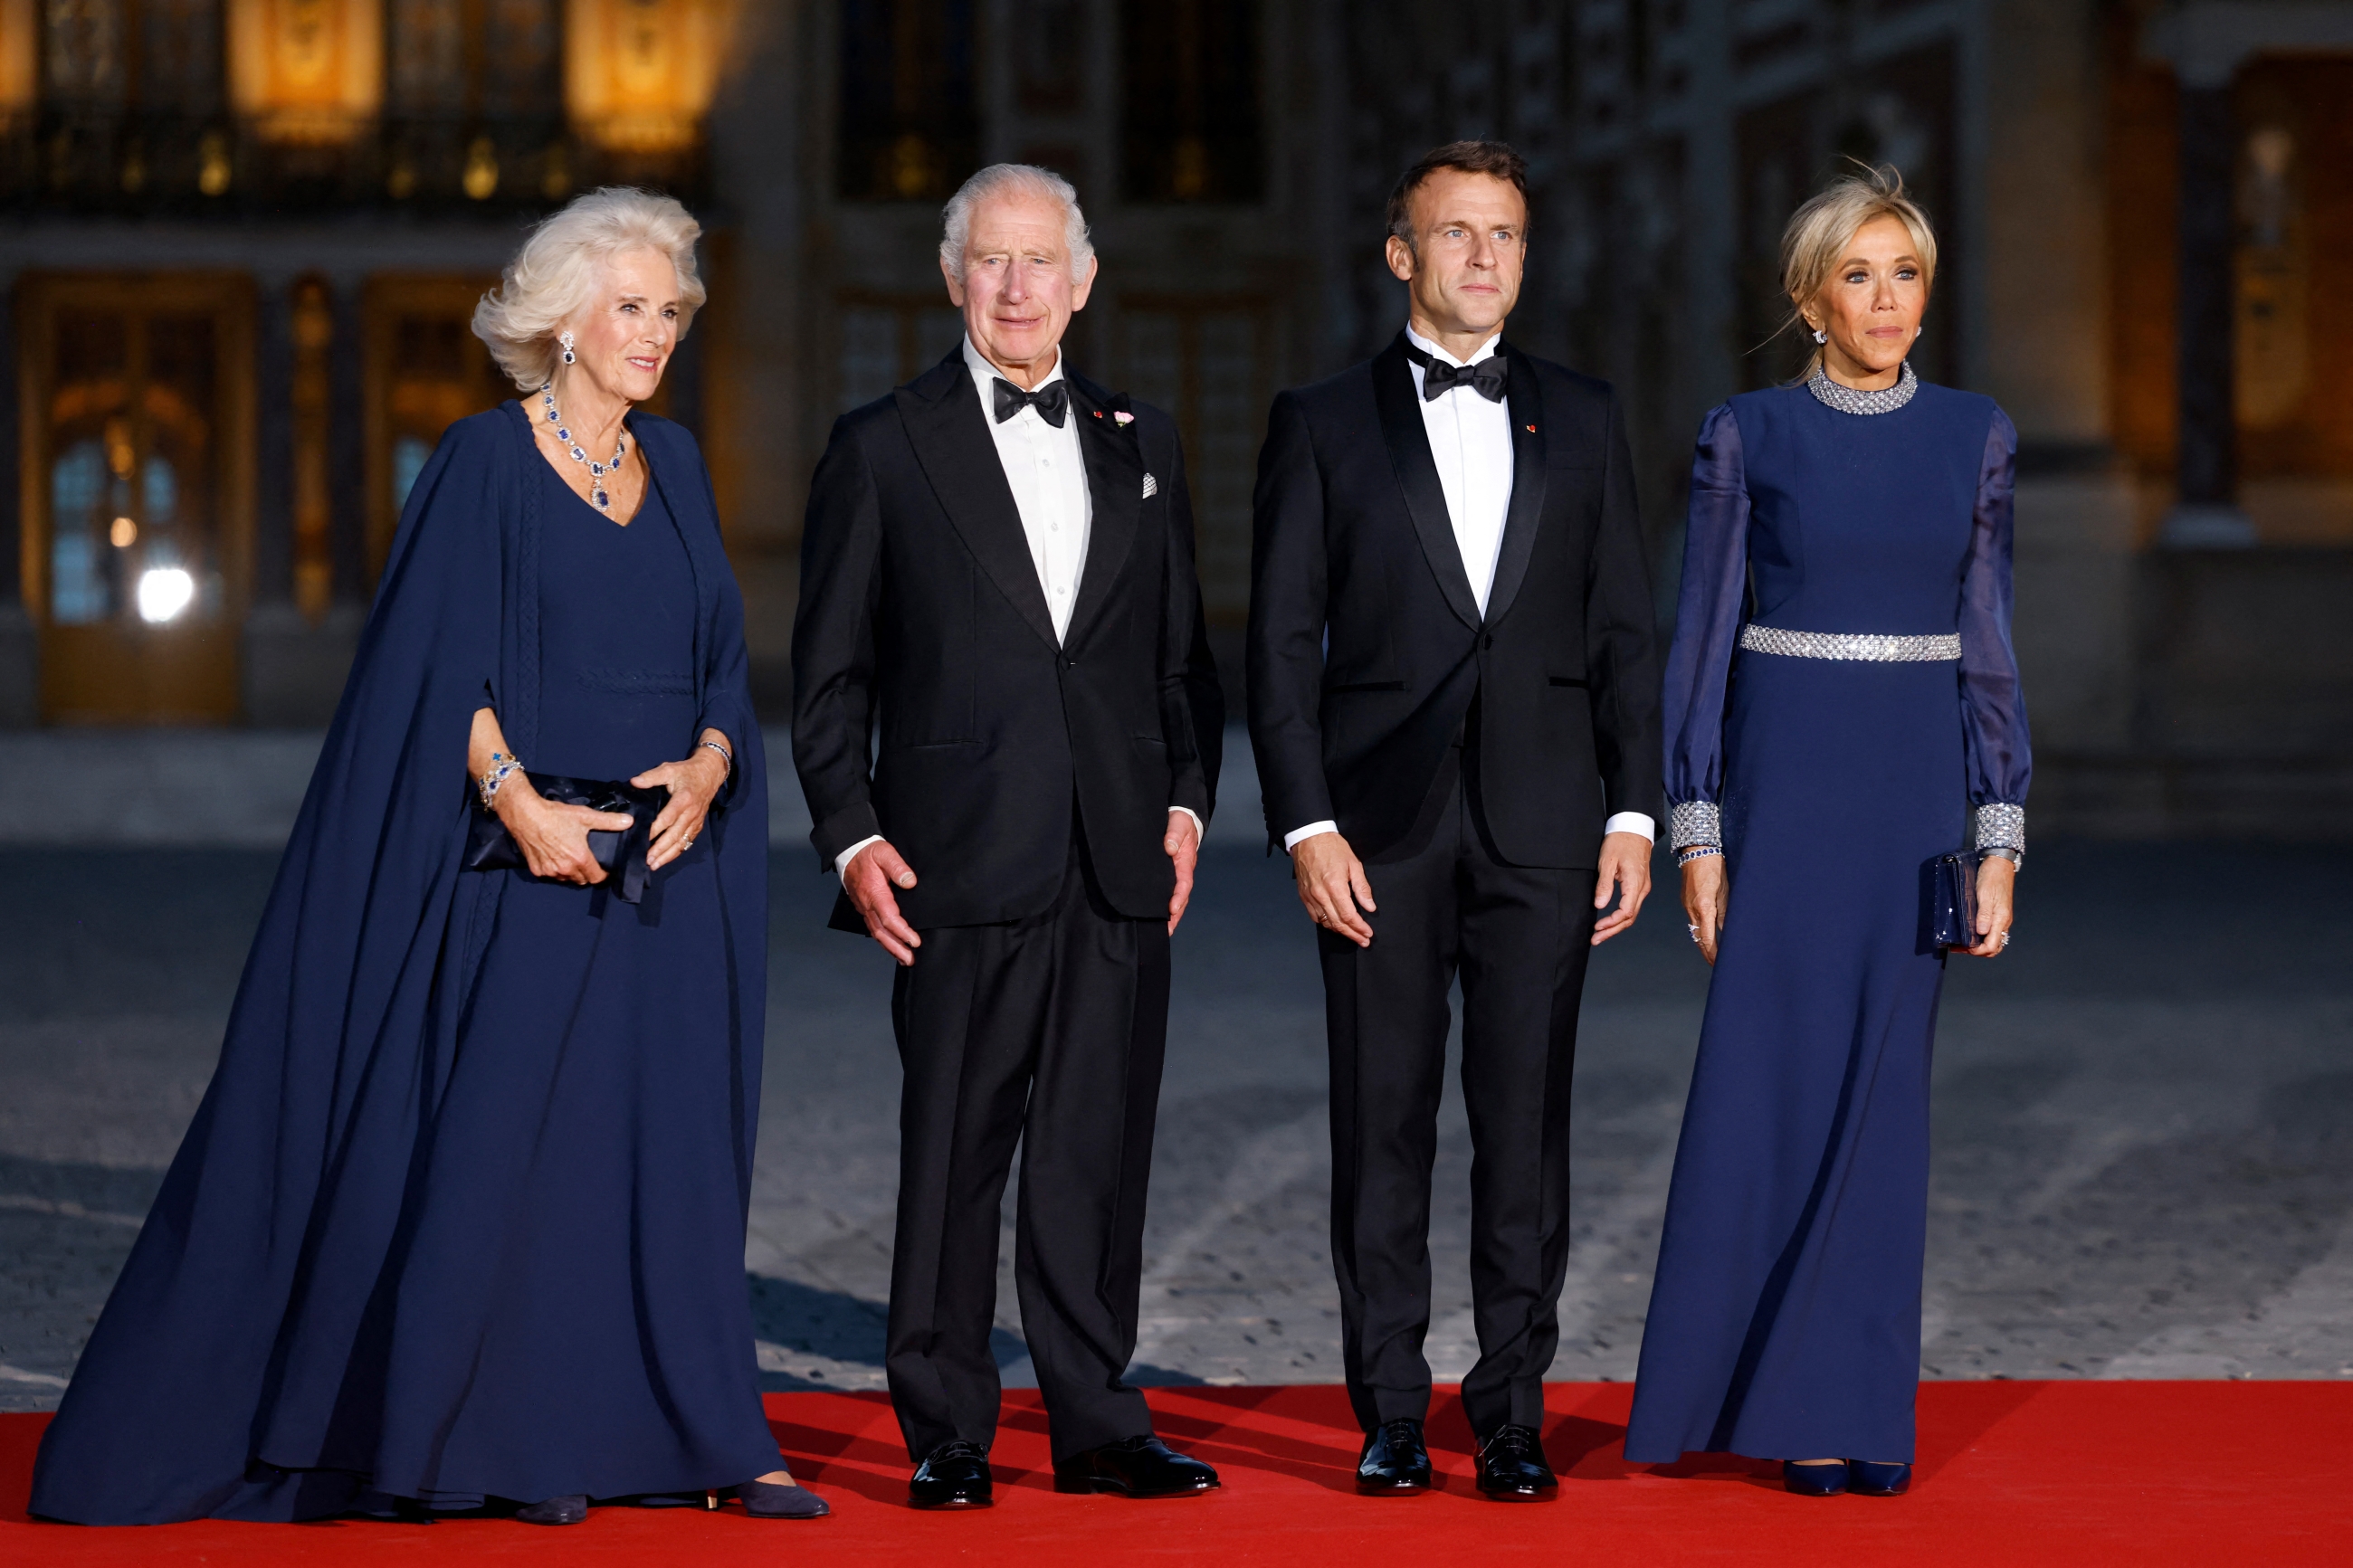 Britain's Queen Camilla and King Charles III with French President Emmanuel Macron and his wife Brigitte at a state banquet at the Palace of Versailles on Wednesday